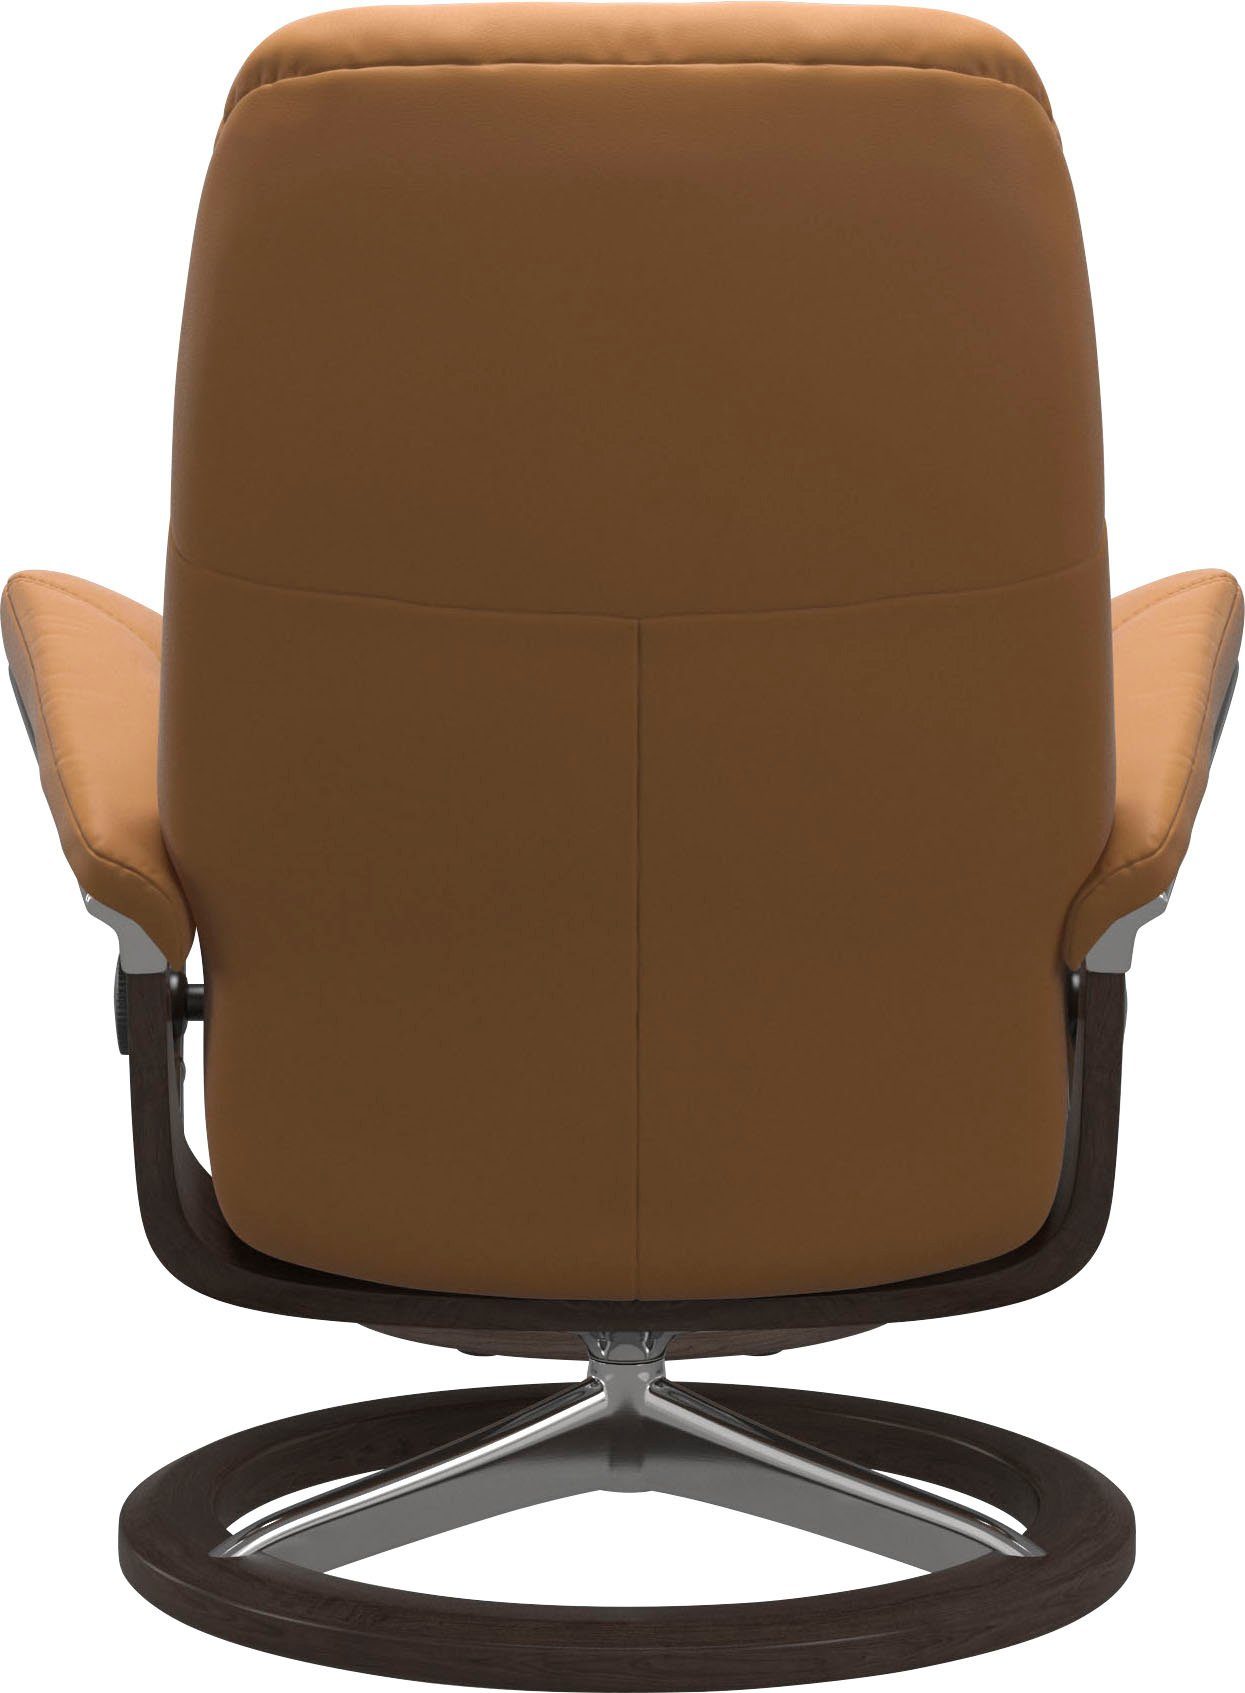 Stressless® Relaxsessel Signature Größe Wenge mit Base, L, Consul, Gestell